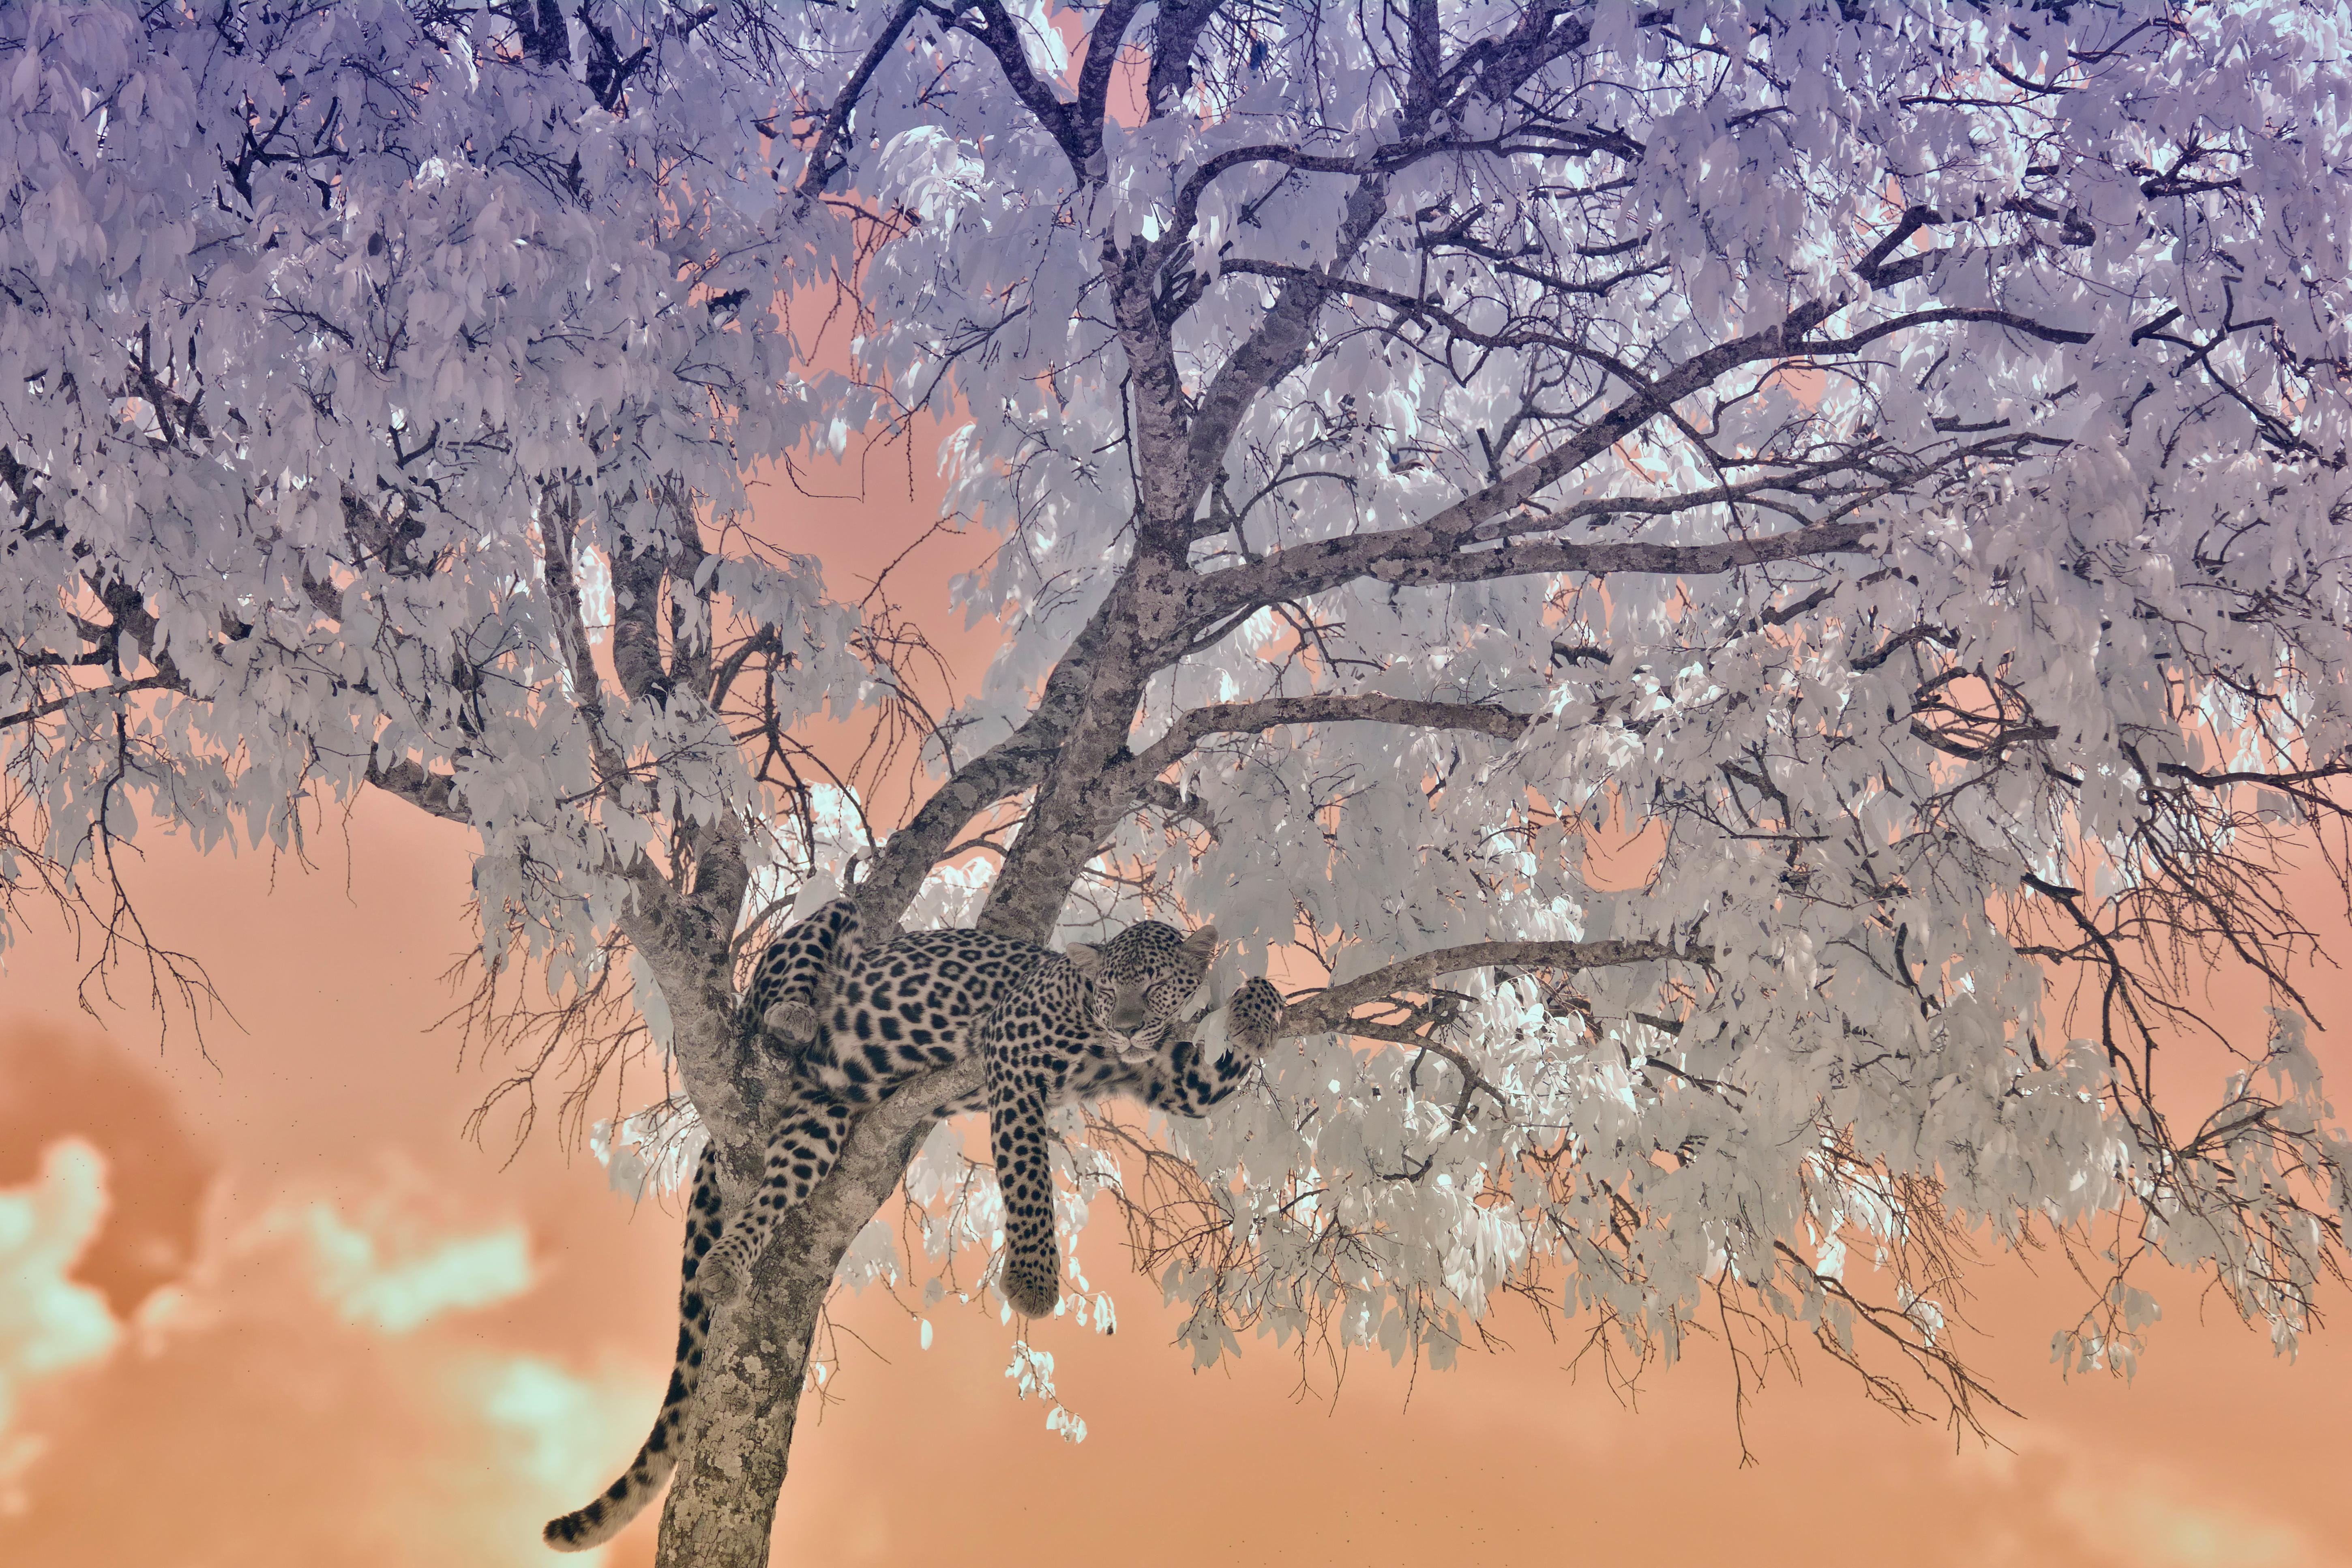 Aditya Dicky Singh Color Photograph - Large Landscape Nature Wildlife Tree Africa Forest Big Cat Leopard Lilac Peach 